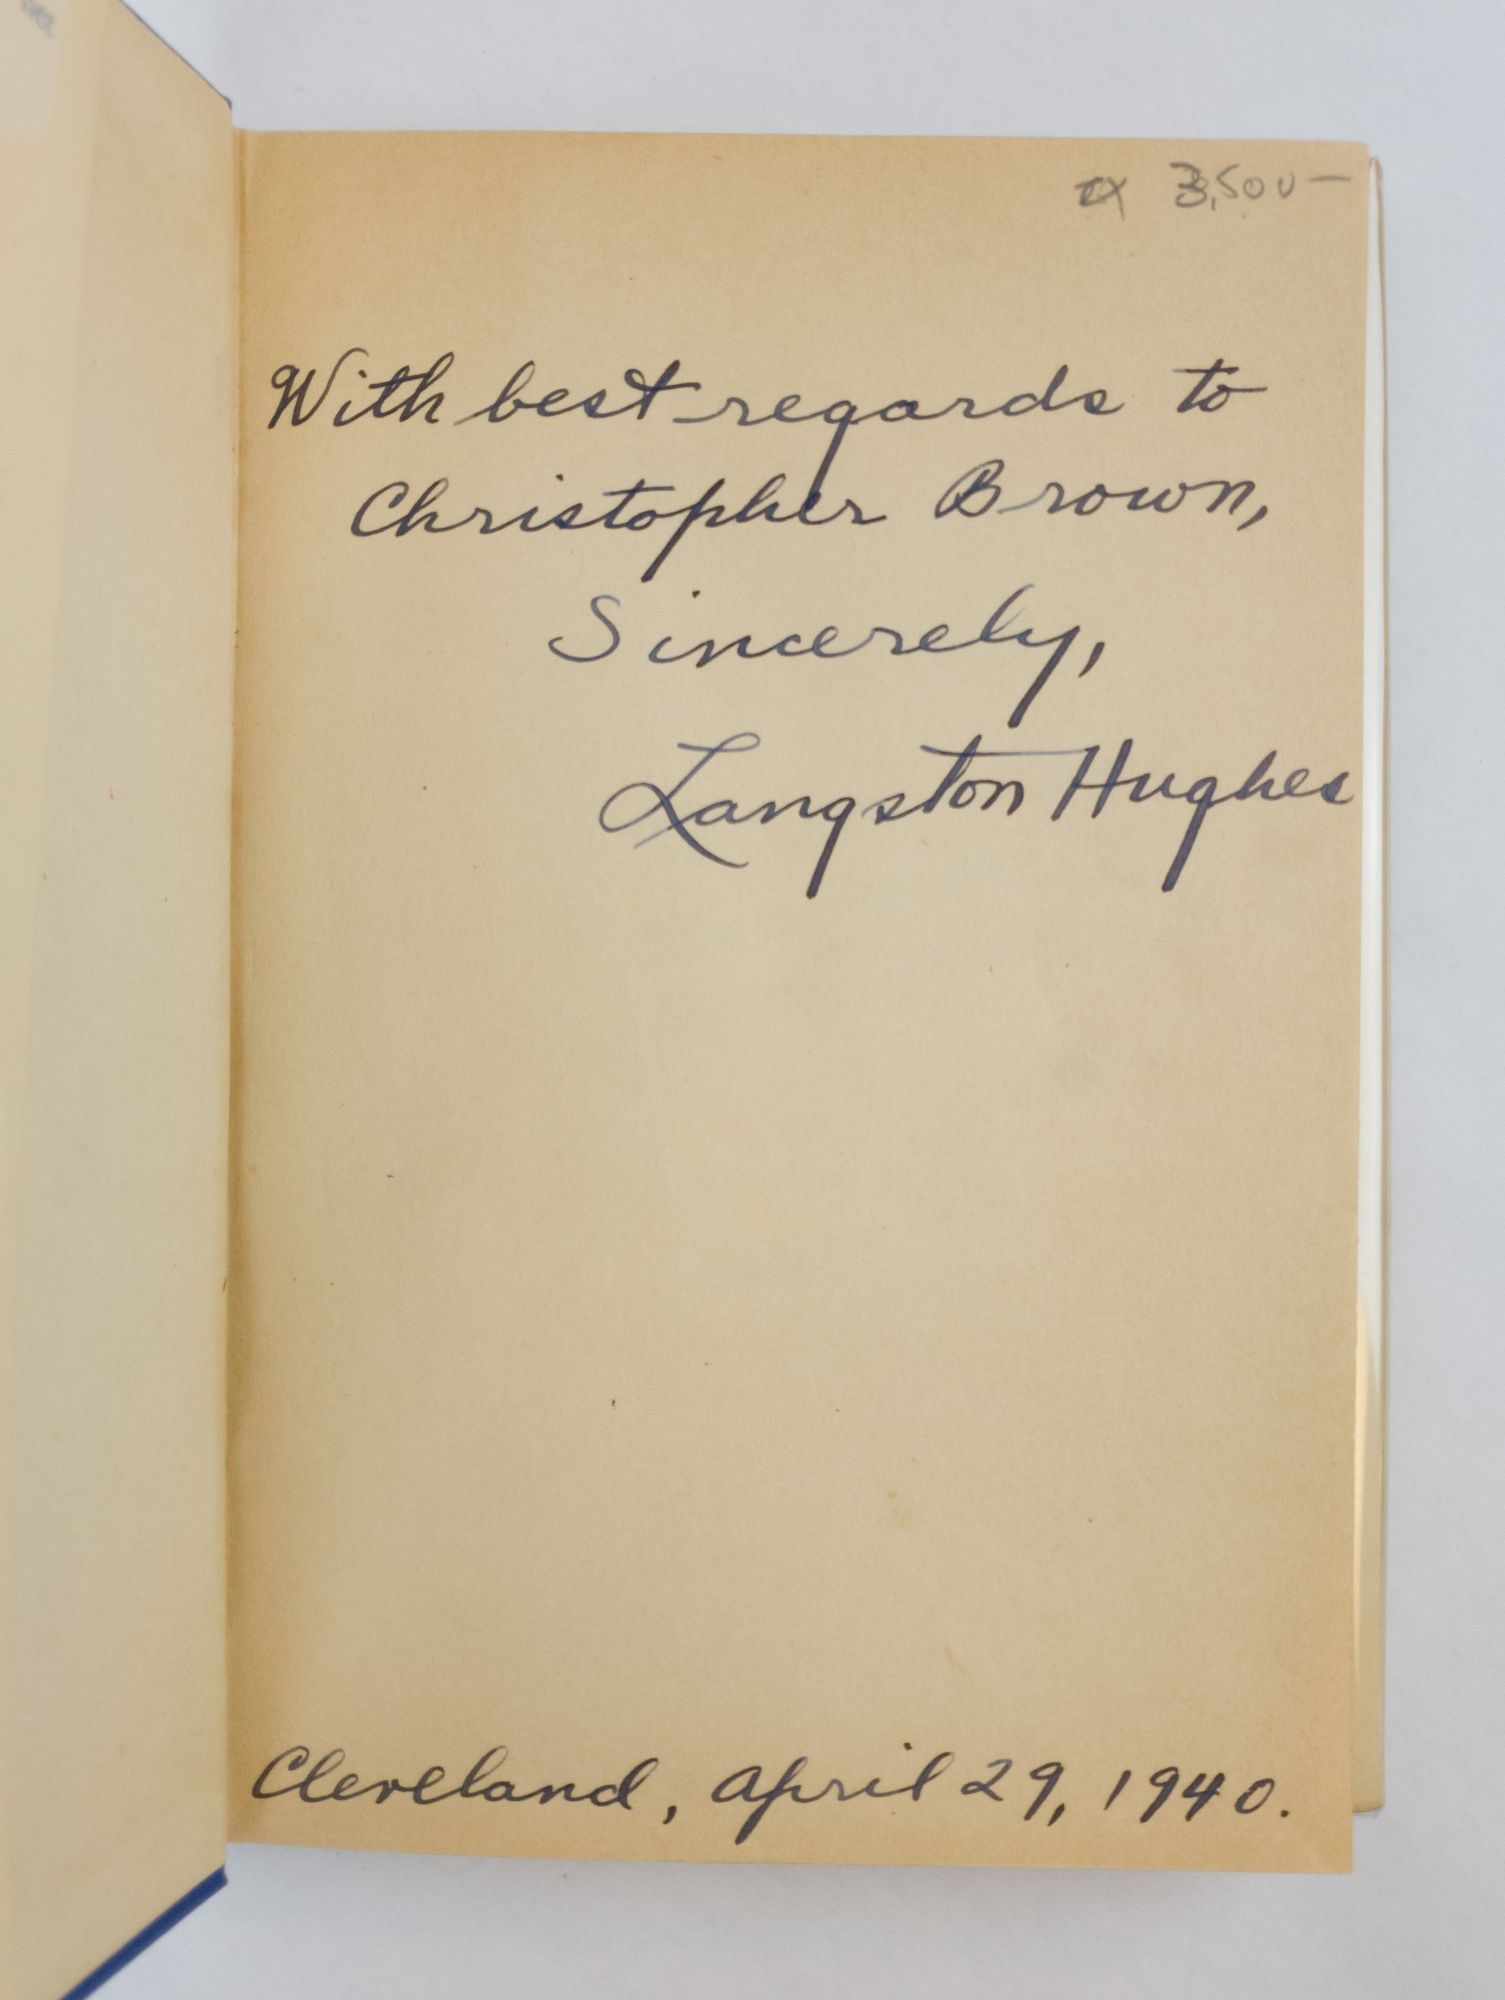 Product Image for THE DREAM KEEPER AND OTHER POEMS [INSCRIBED]